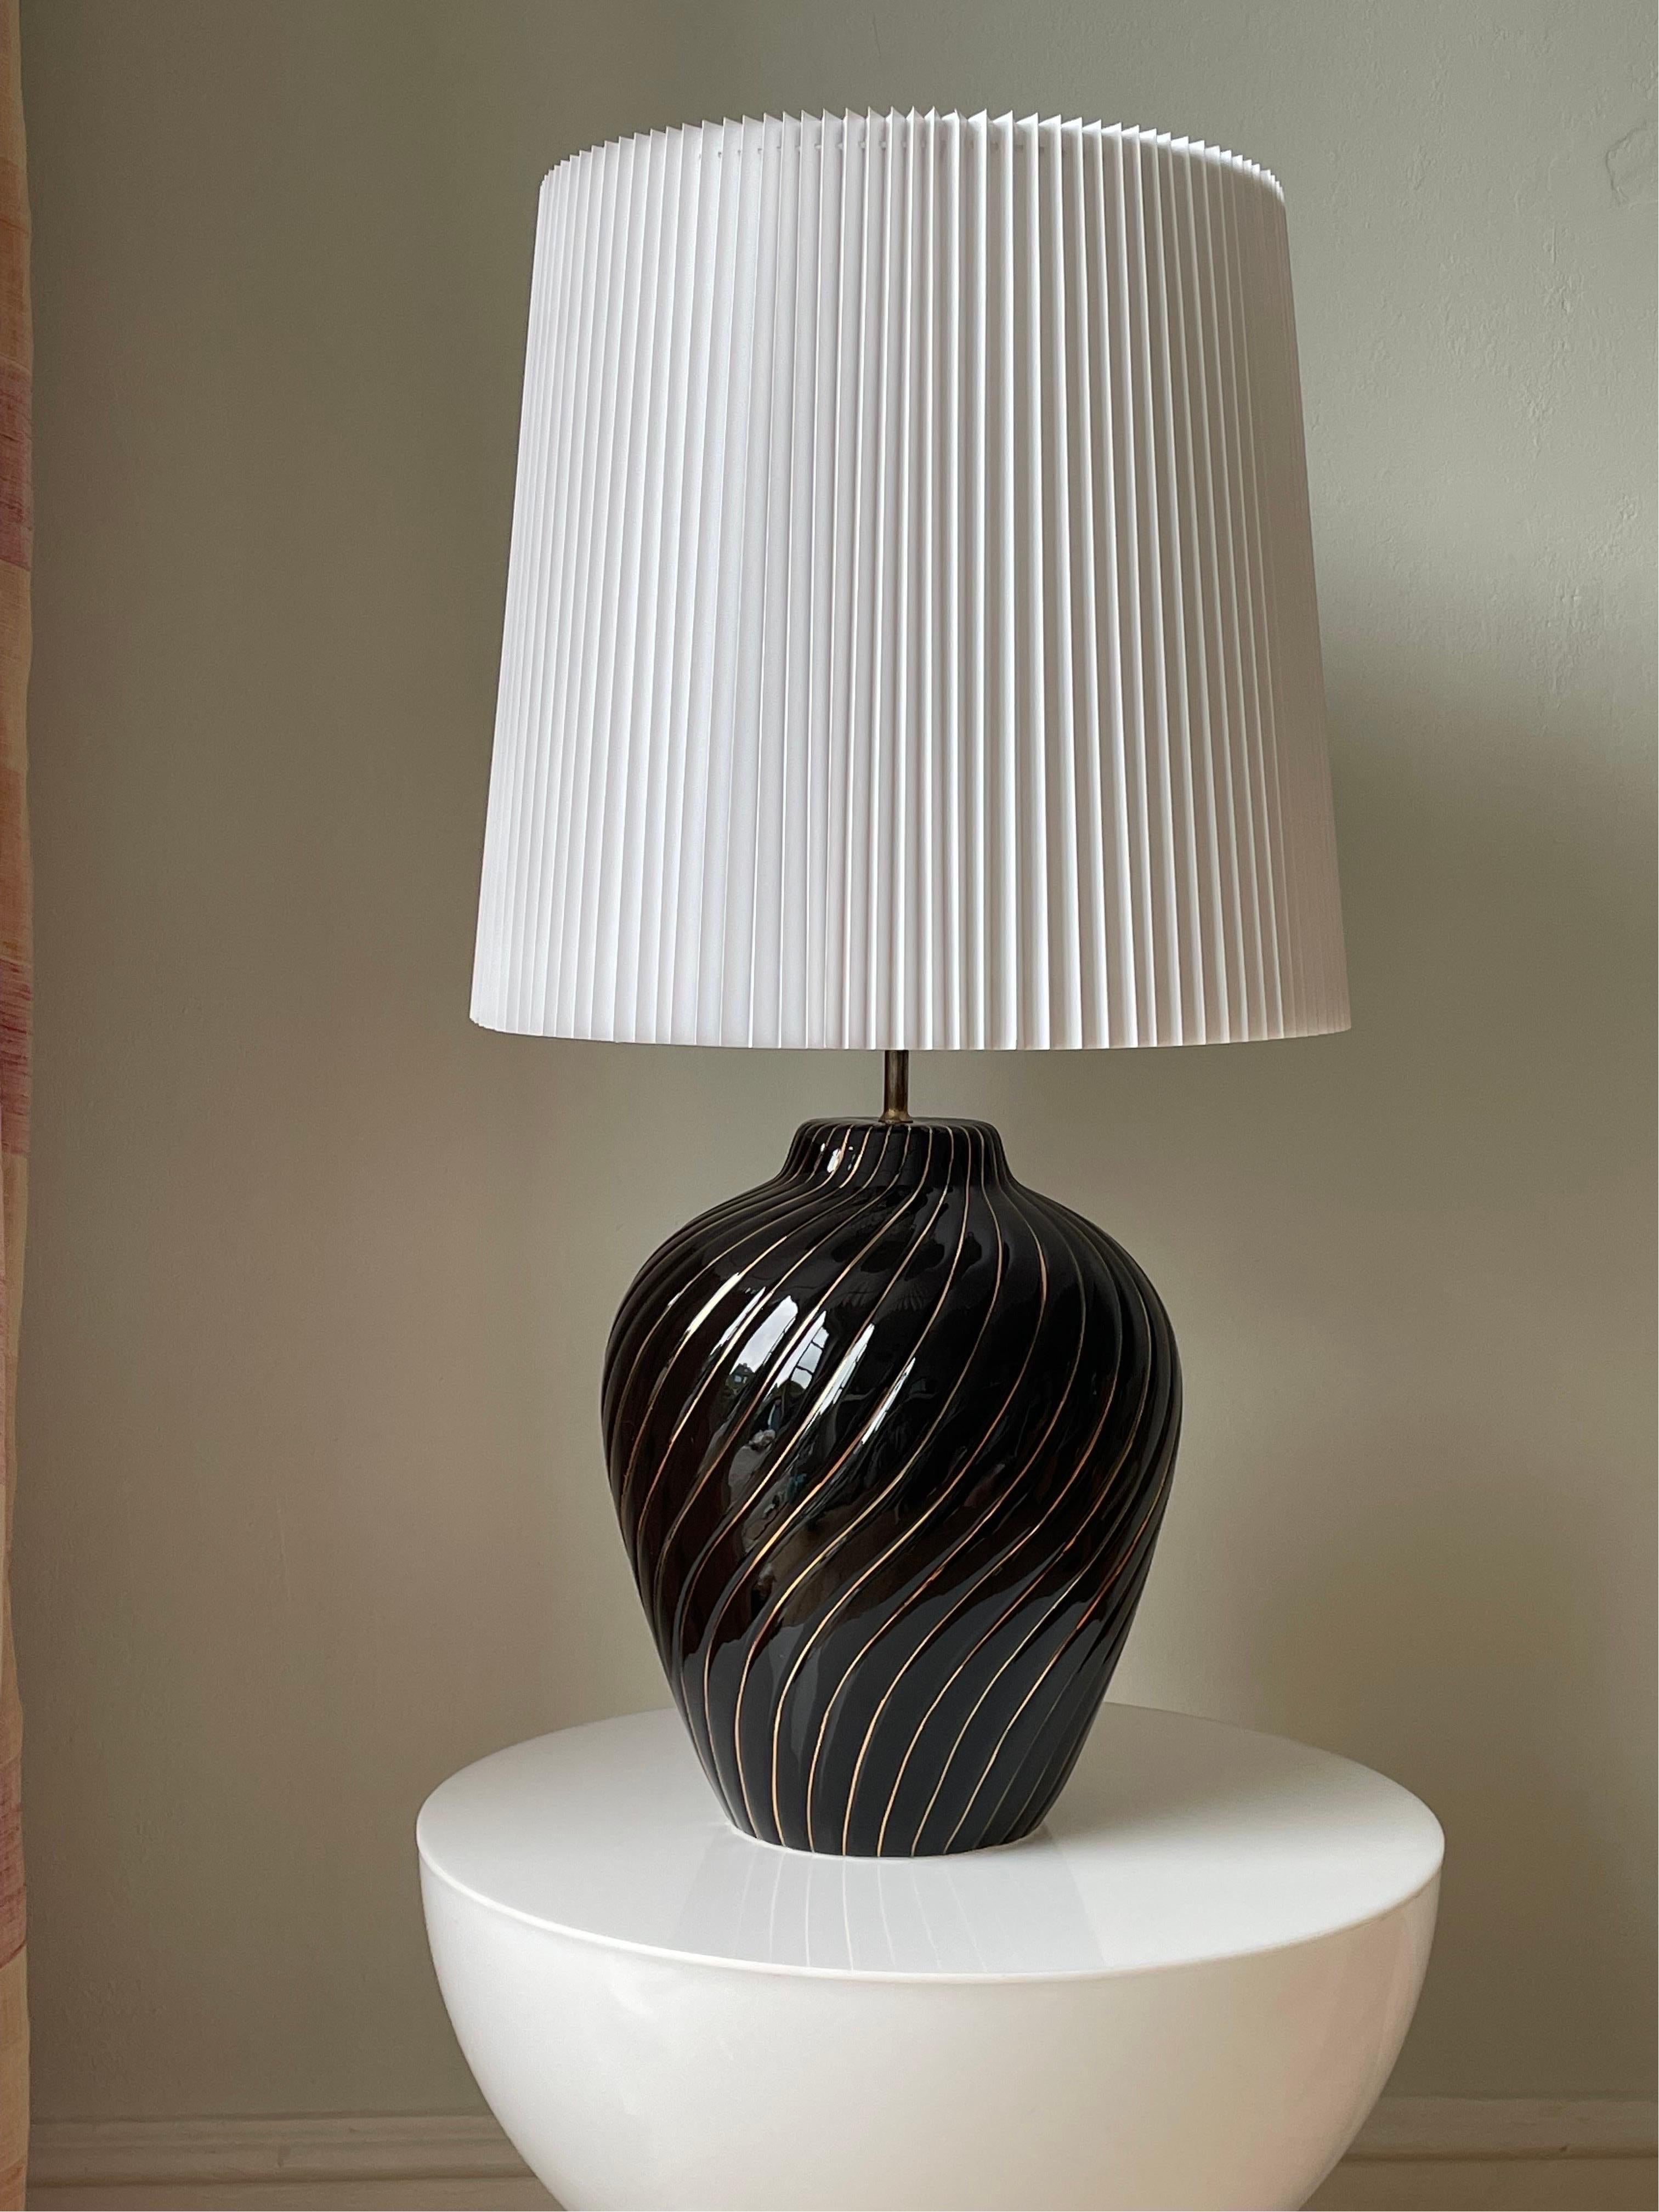 Glazed Large Tommaso Barbi Style Black Gold Table Lamp, Italy, 1970s For Sale